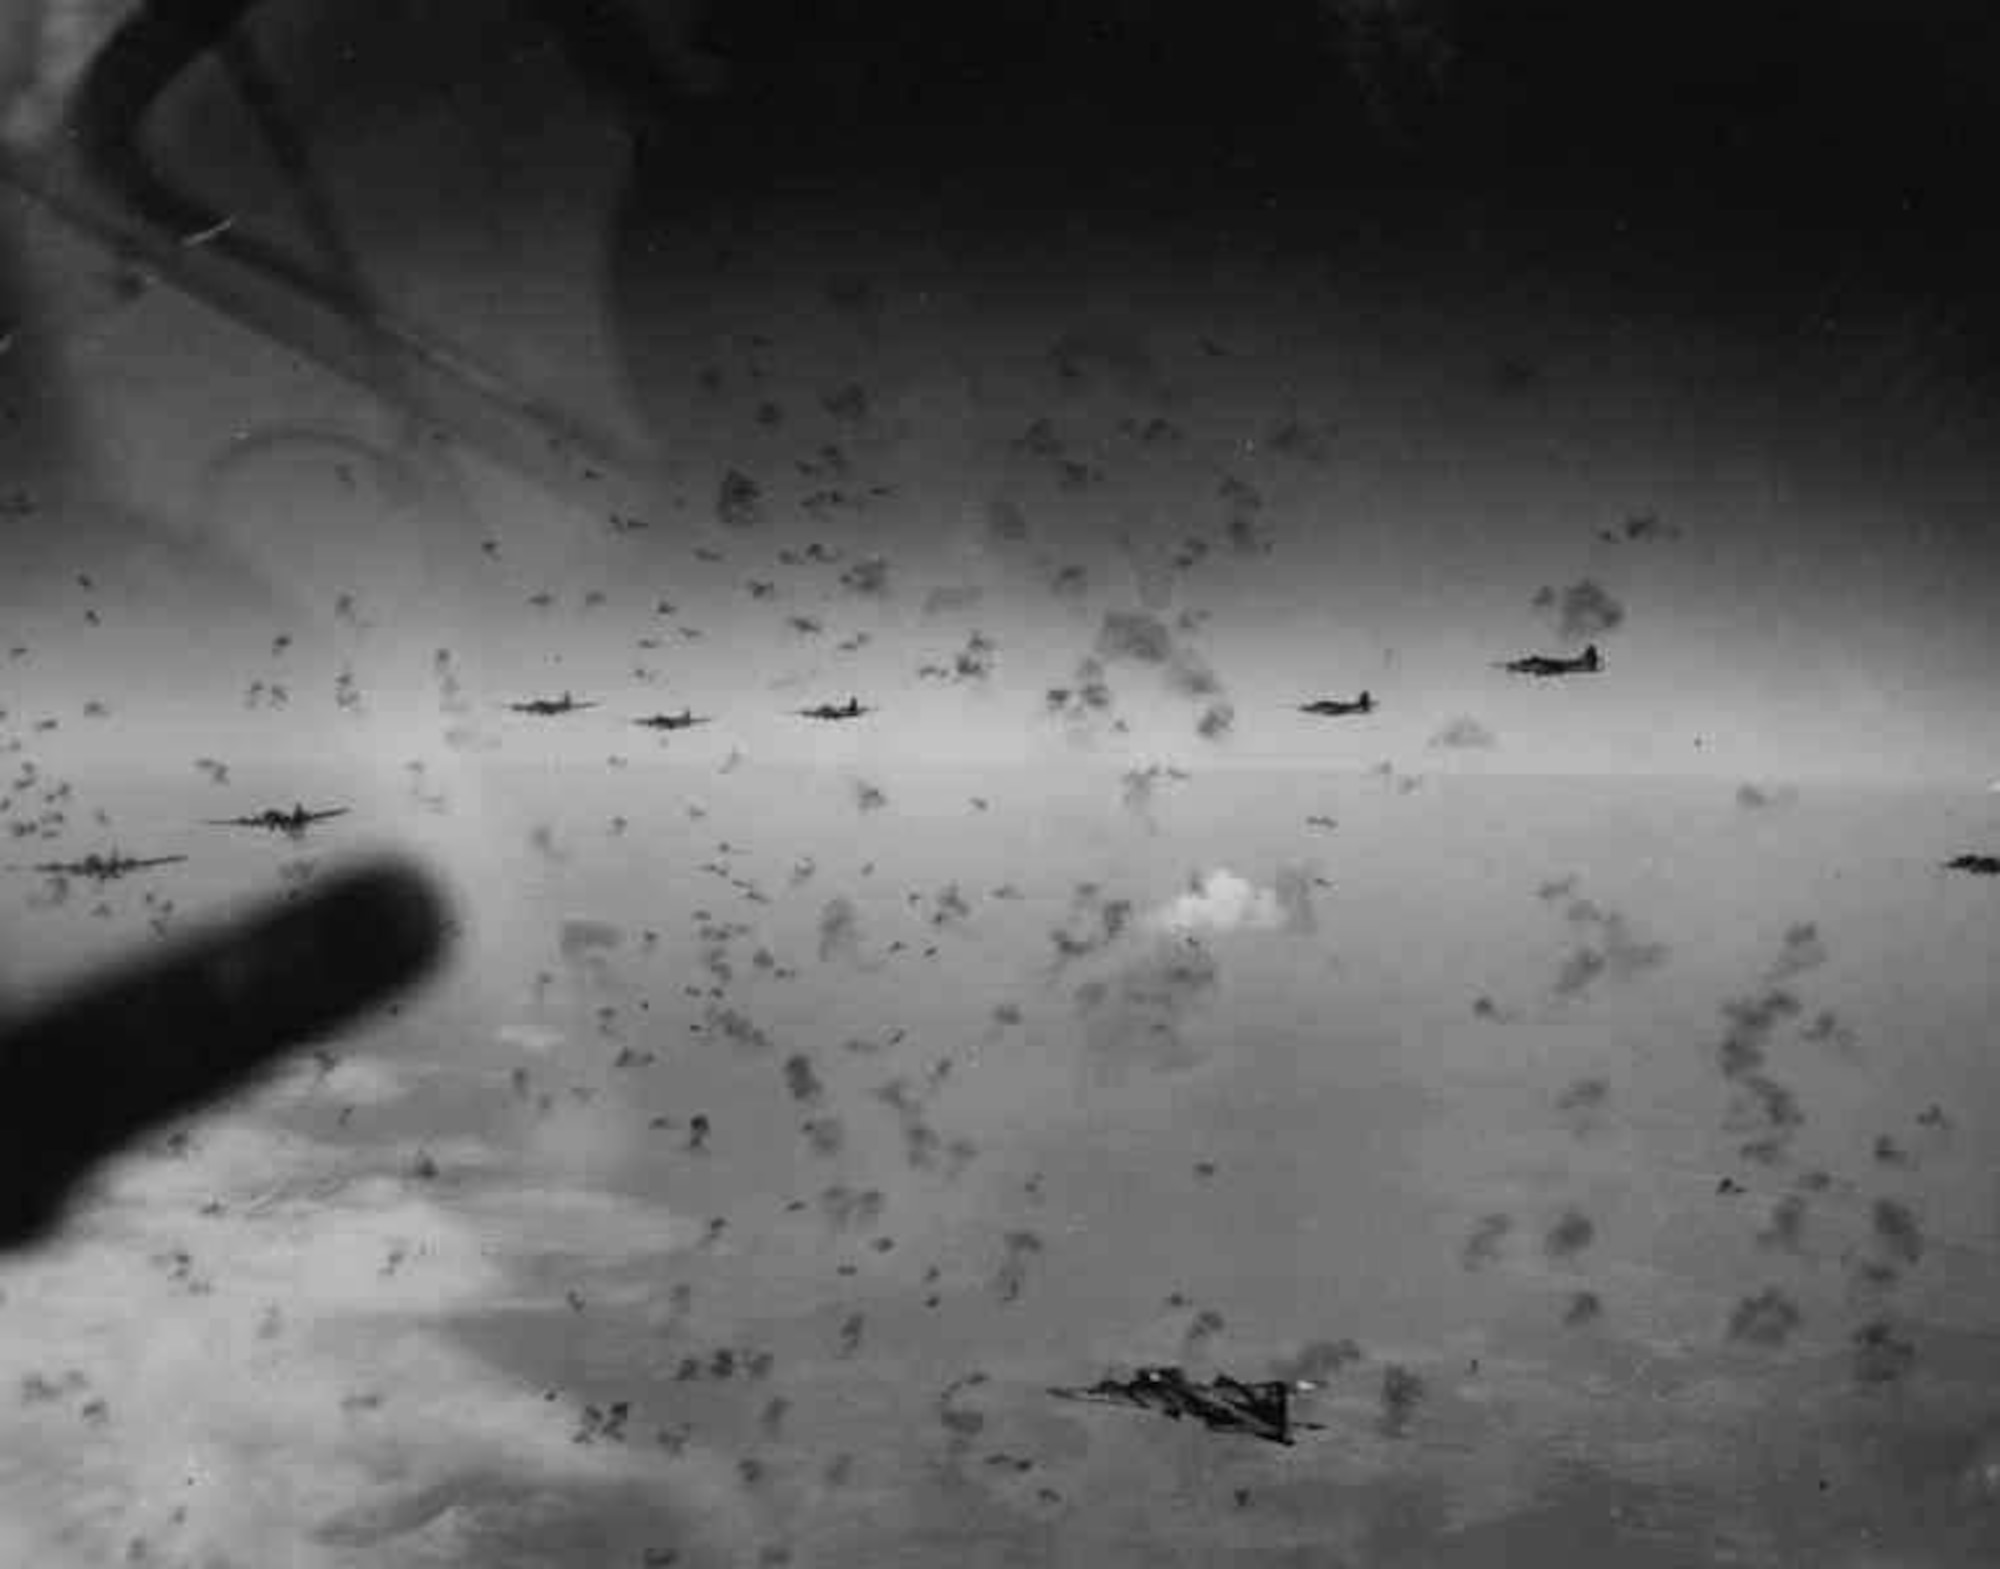 B-17 formation under attack during a bombing raid on an industrial target in Germany, probably sometime in 1943. By fall 1943, German antiaircraft defenses—fighters, ground-based anti-aircraft artillery batteries and specially designed flak towers around key industrial centers—had become quite formidable. The black smoke dots came from exploding AAA shells, fitted with proximity fuses. (U.S. Air Force photo)